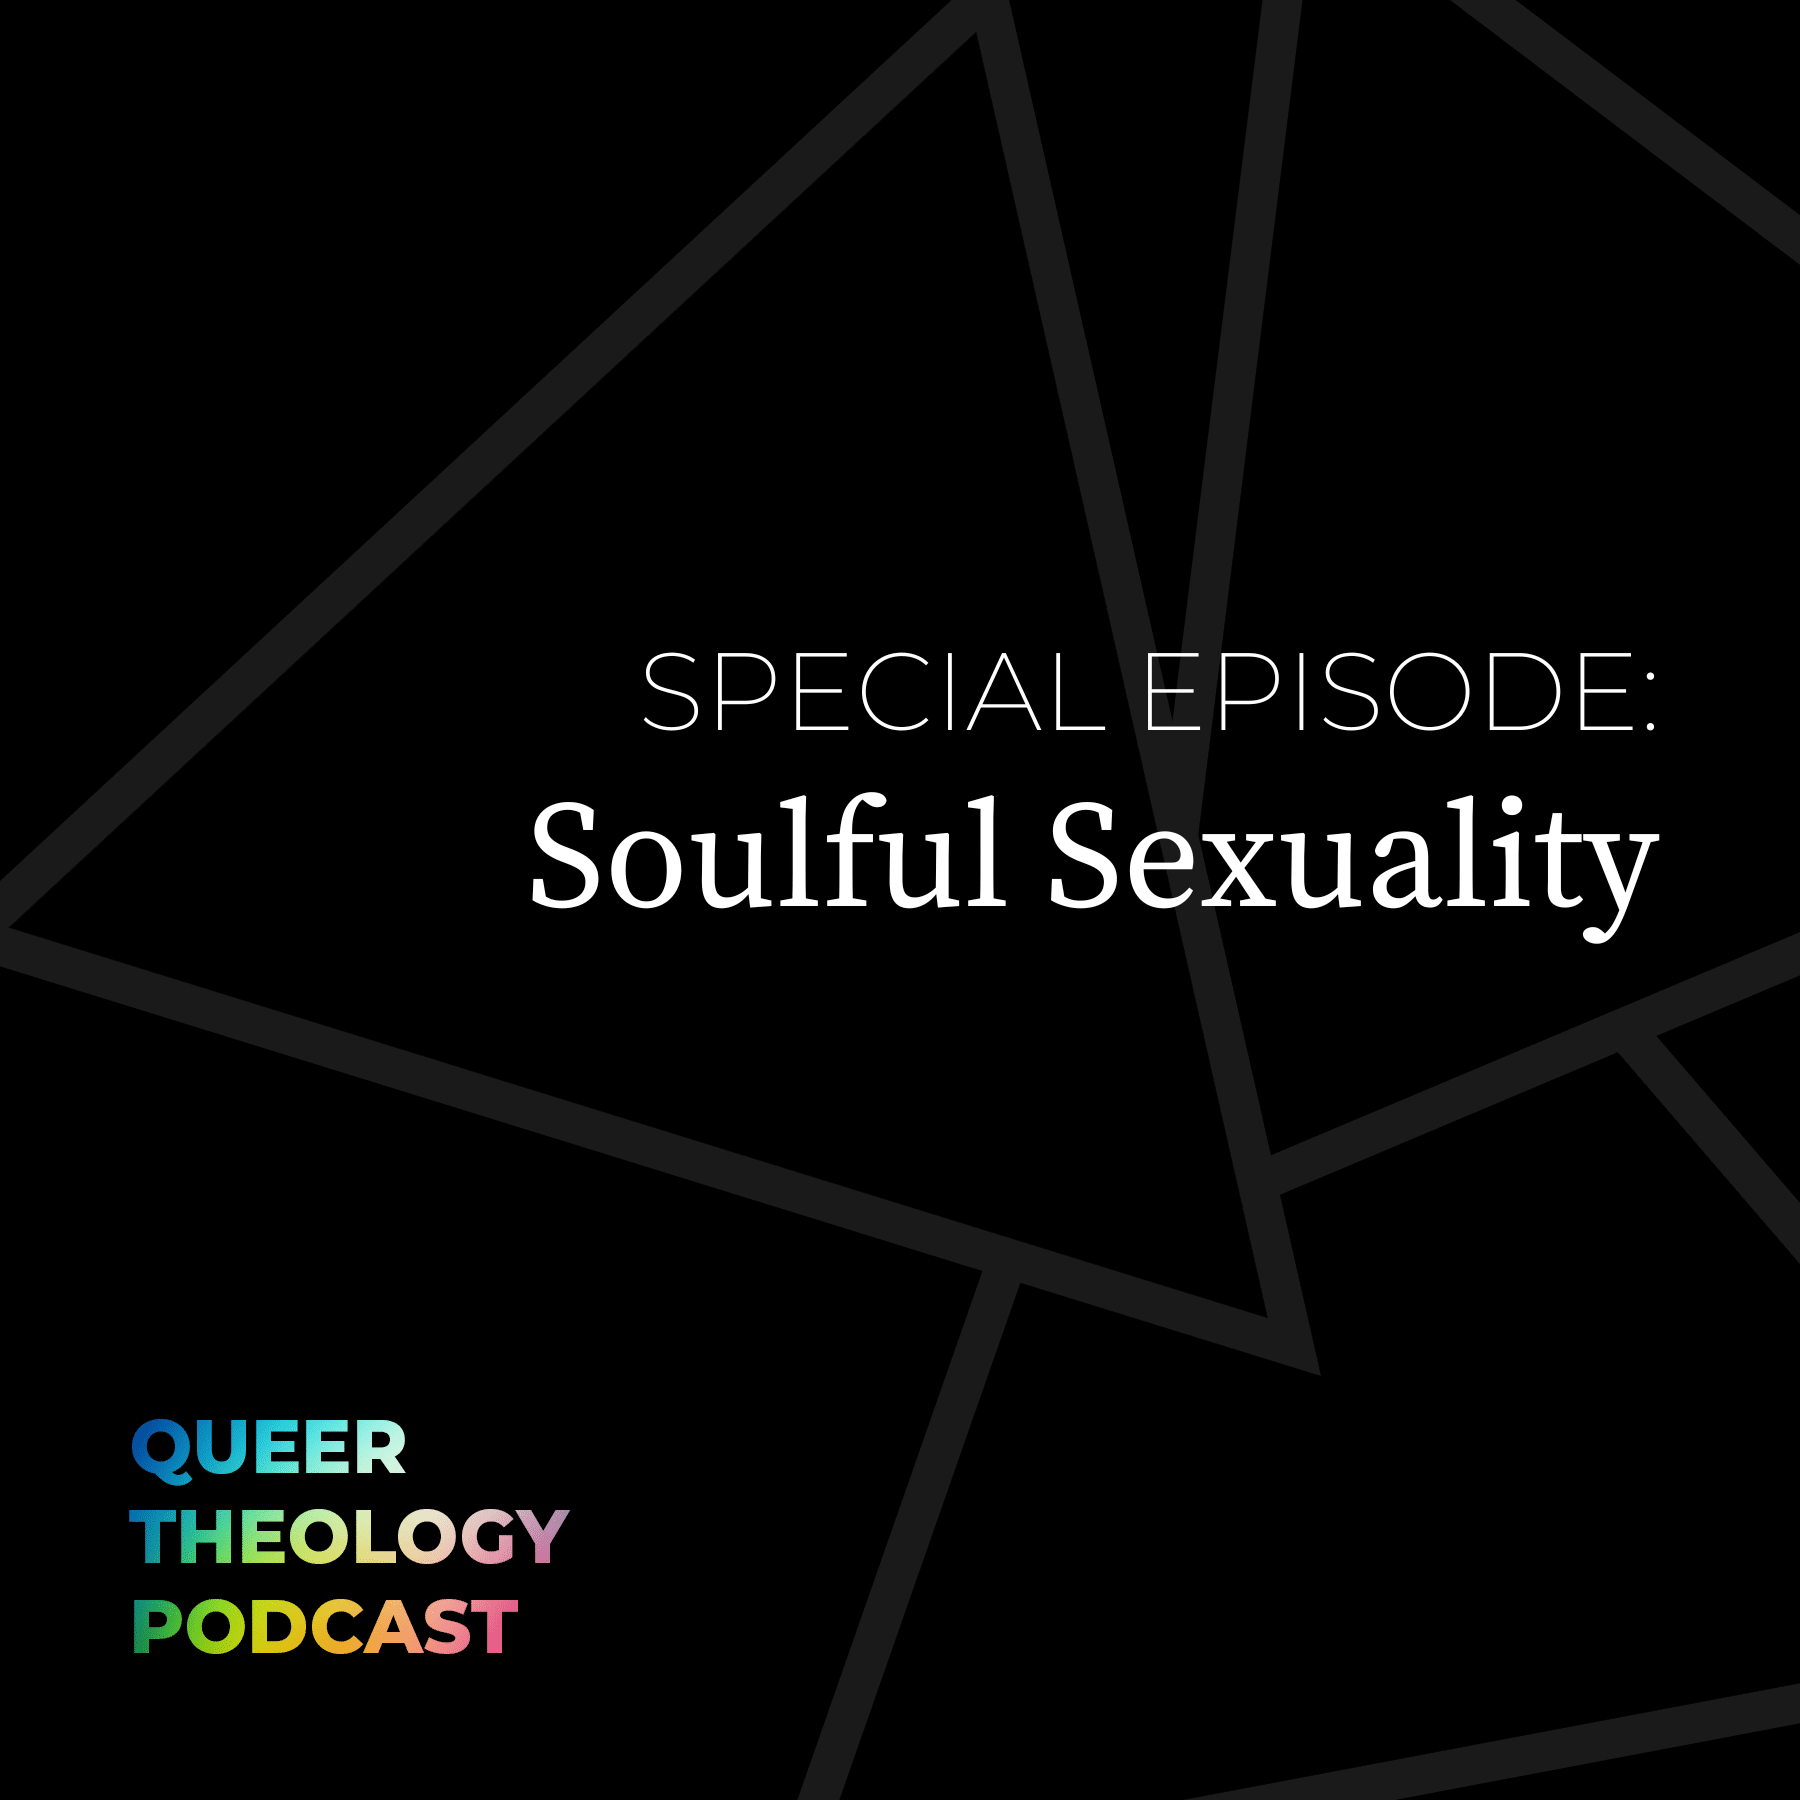 Soulful Sexuality